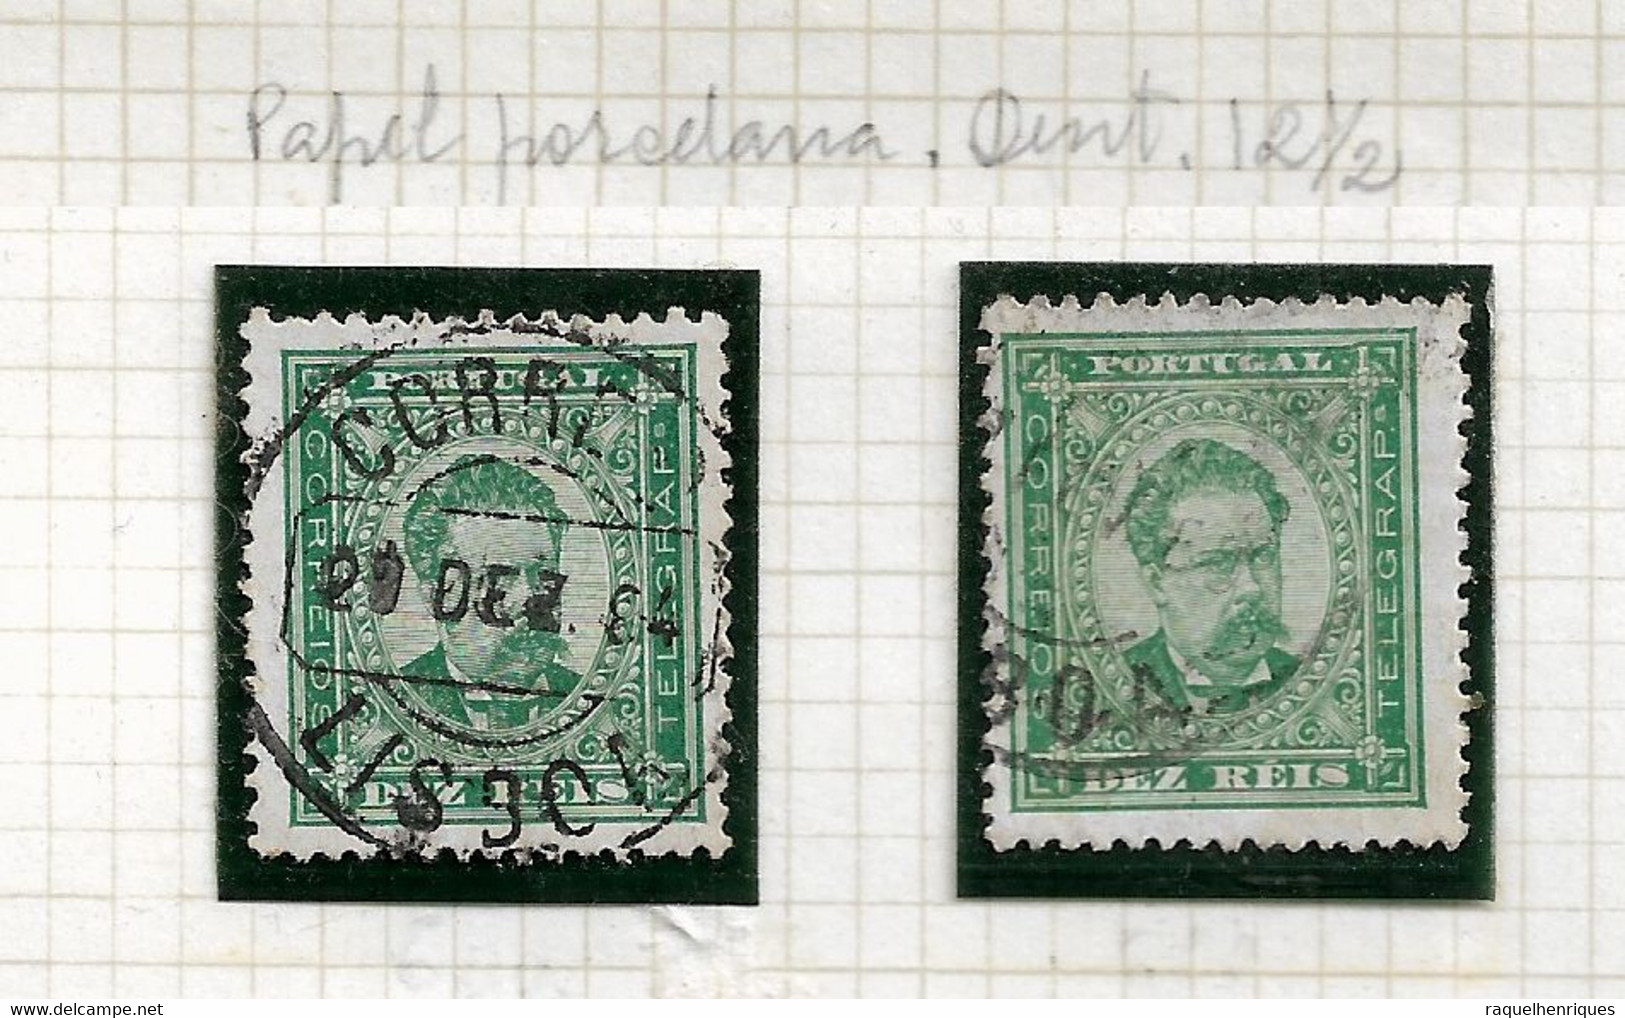 PORTUGAL STAMP - 1884-87 D.LUIS I P.PORCELANA Perf:12½  Md#61a DIF. TONES USED (LPT1#221) - Unused Stamps